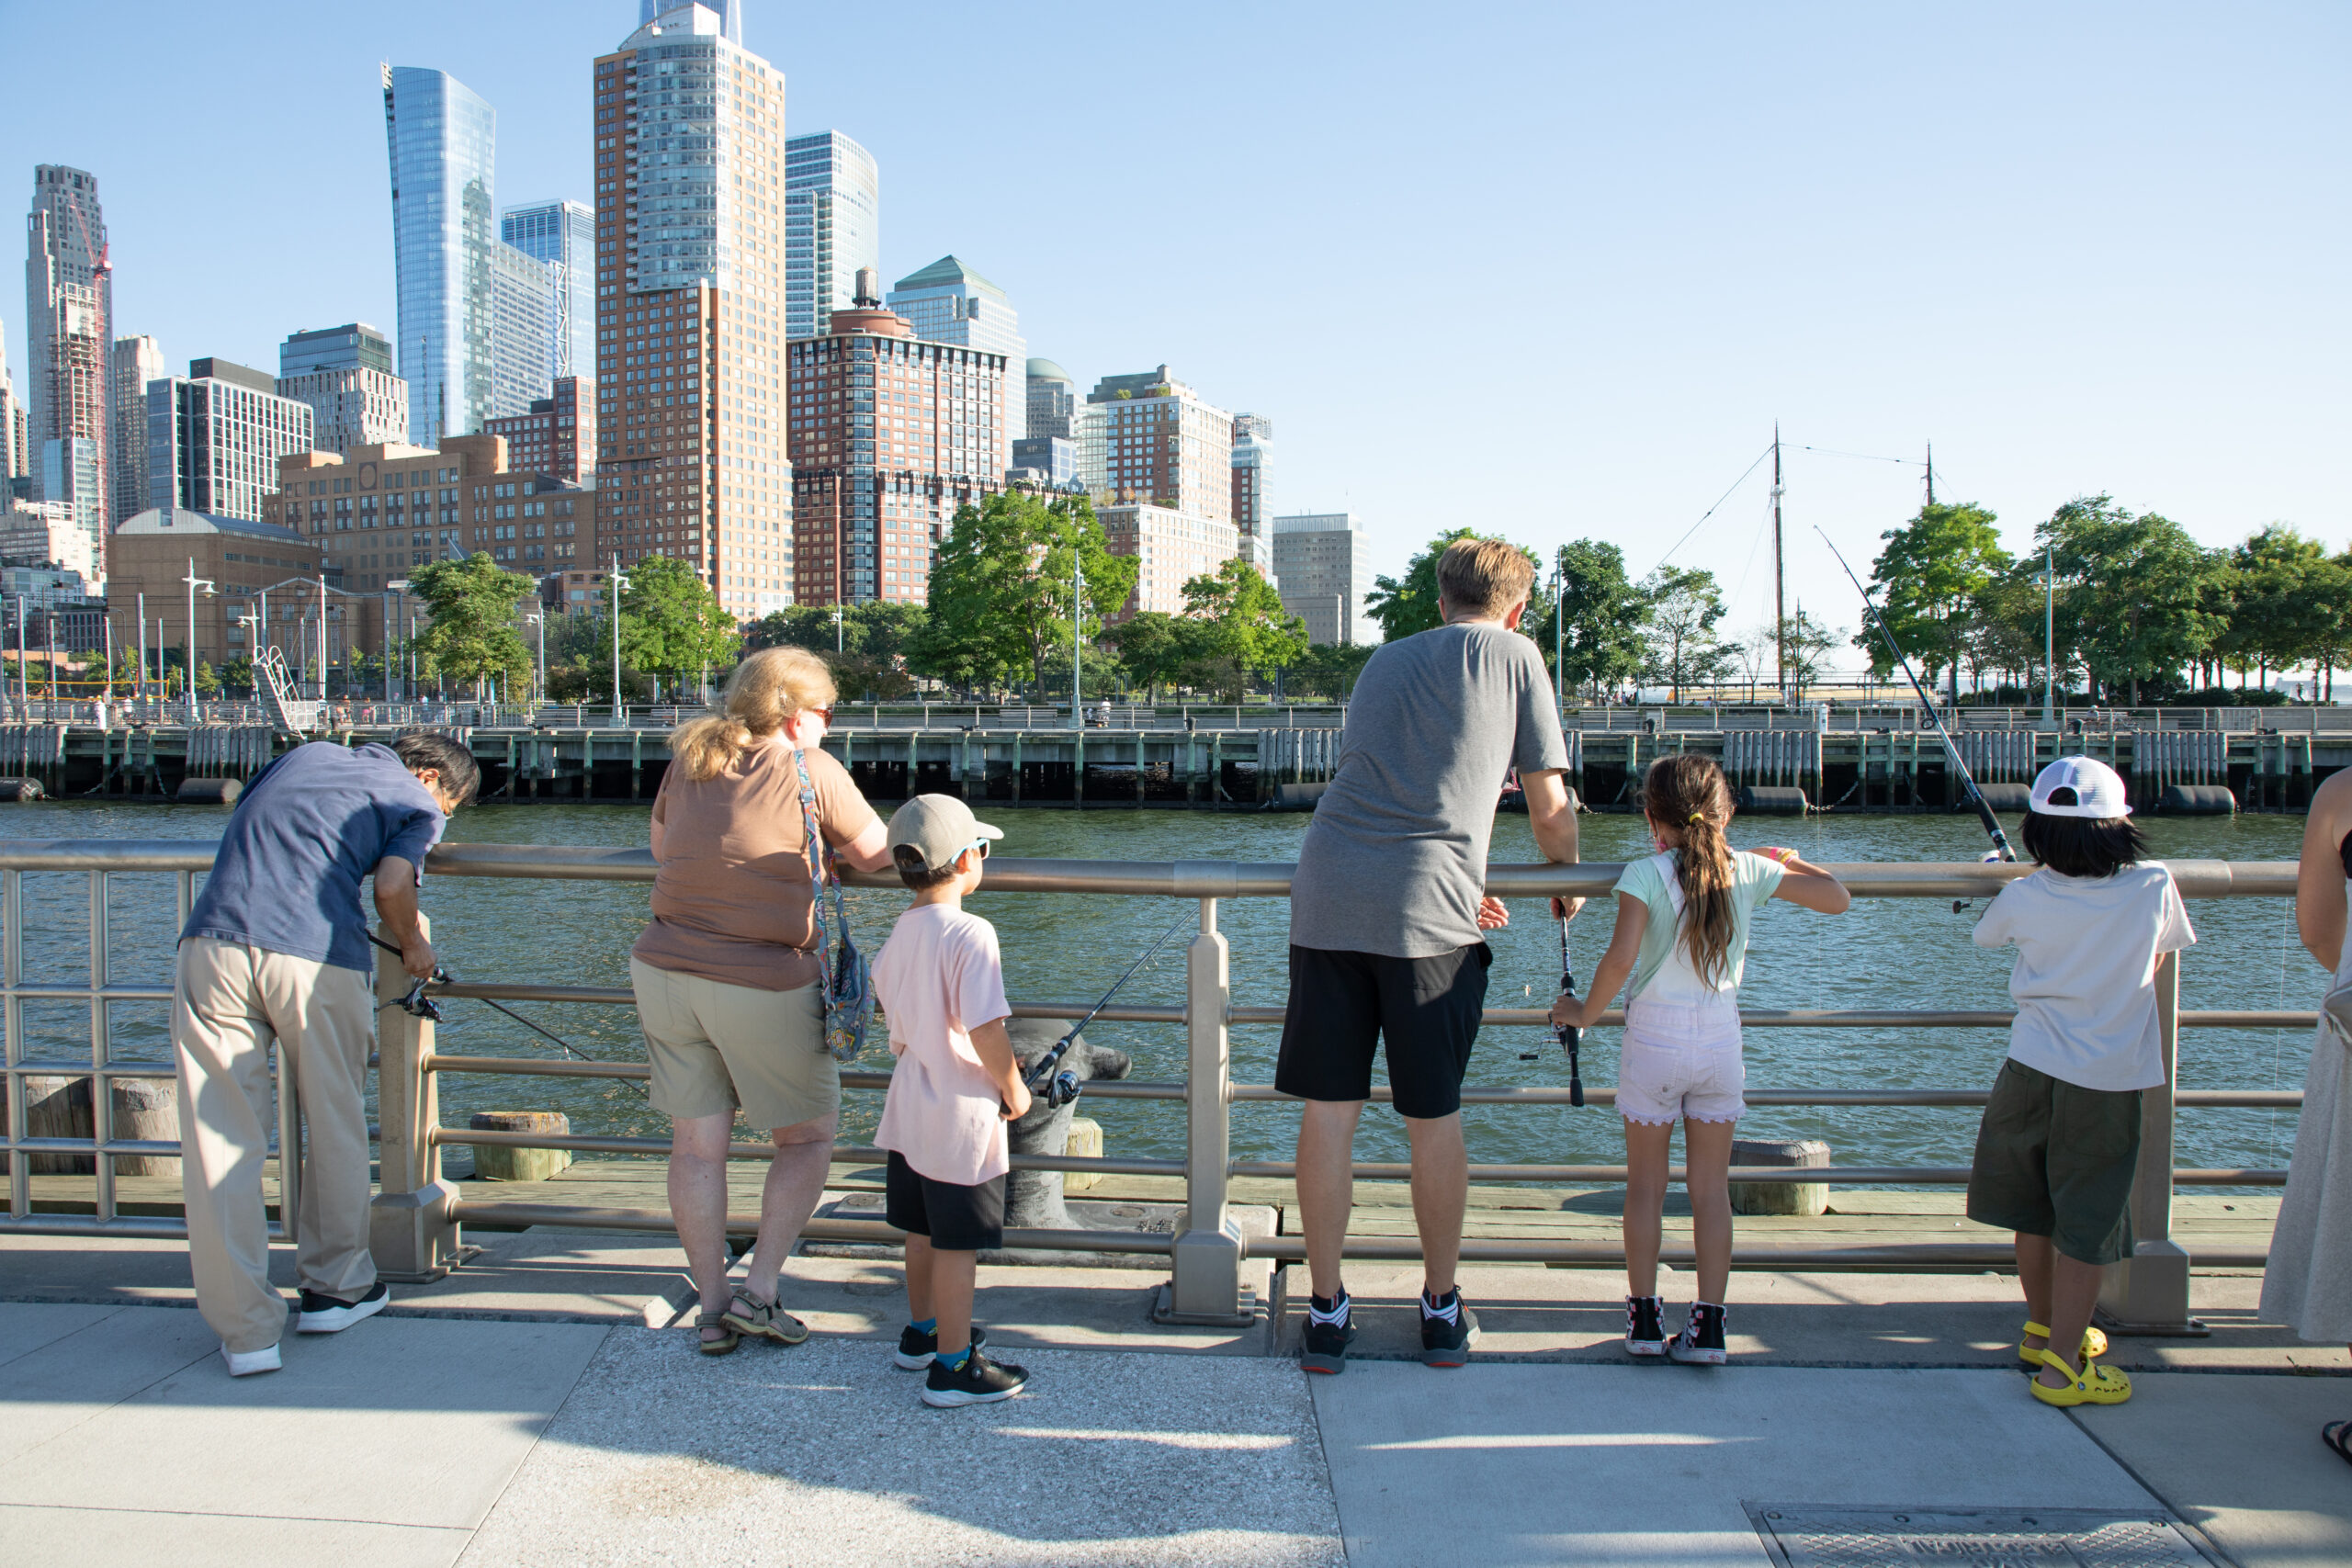 Children and adults cast lures at Big City Fishing on Pier 26